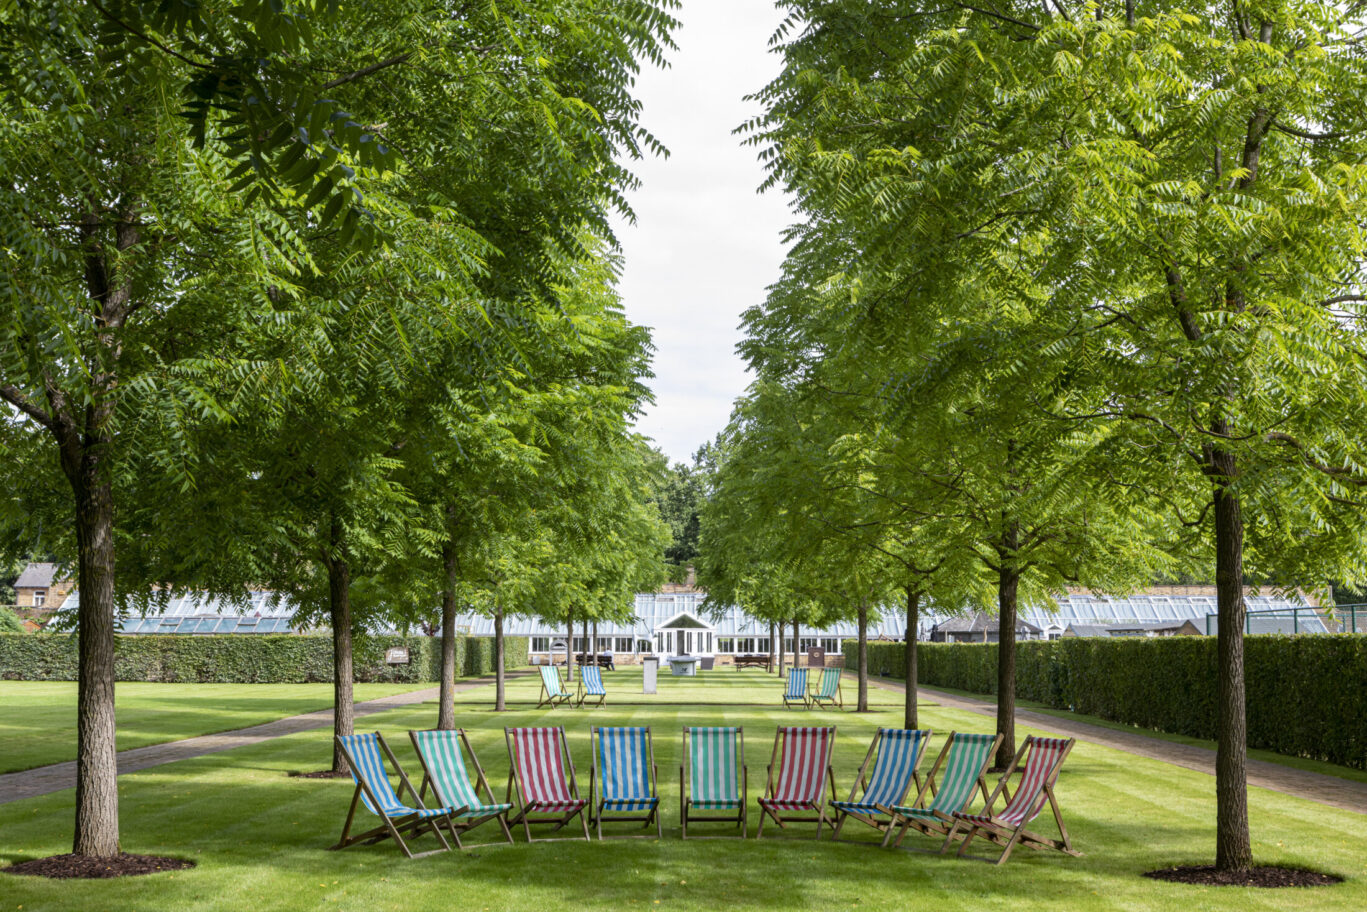 Deck chairs in the Walled Garden